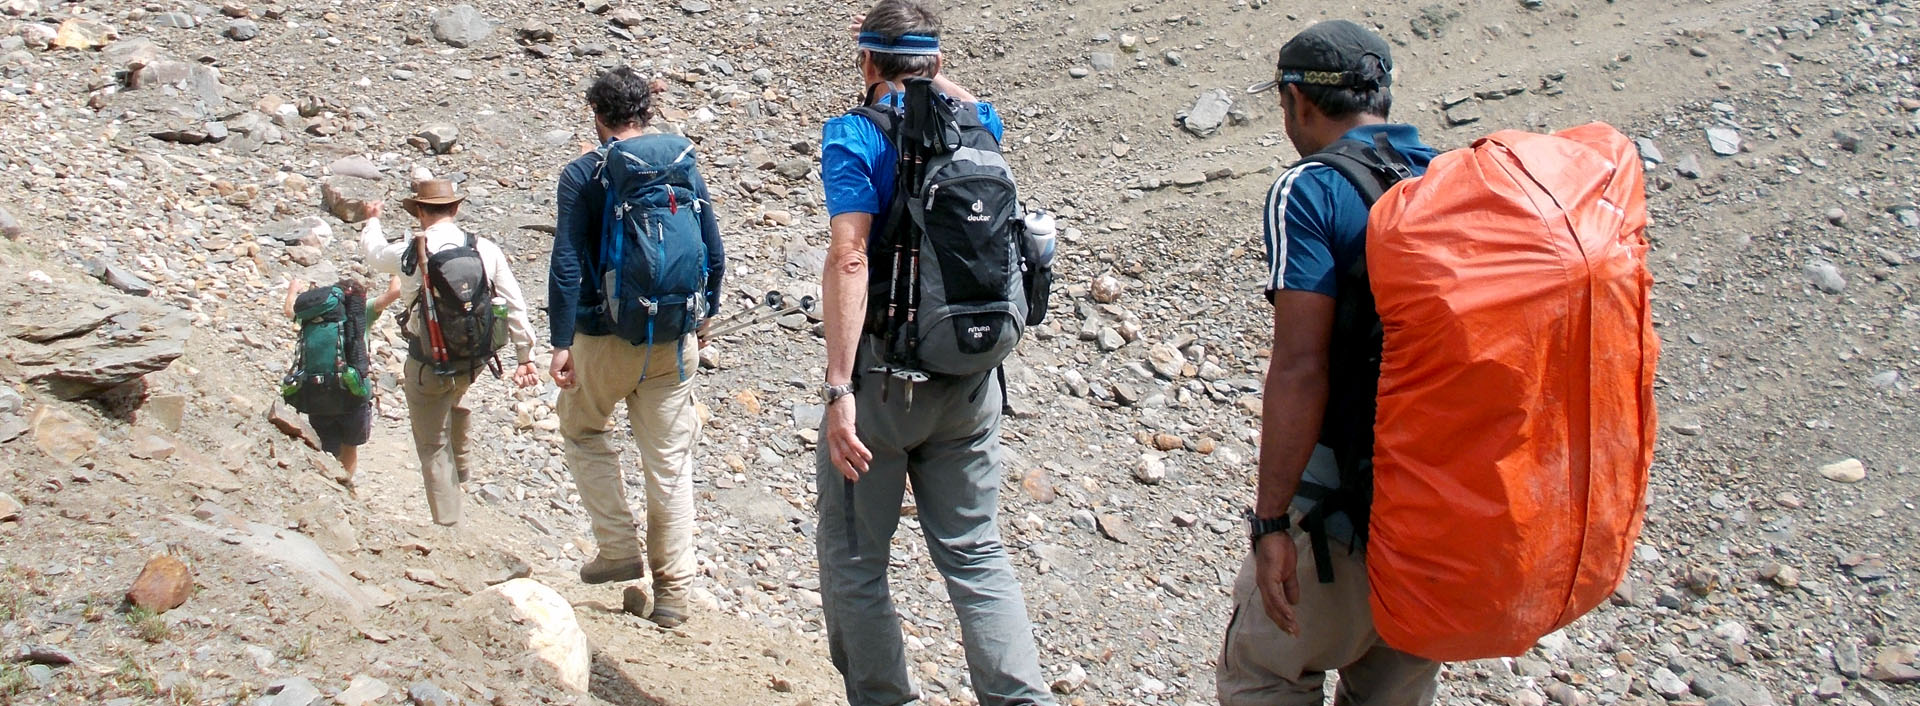 trainee traveling on a route with backpacks on backpacking skills course